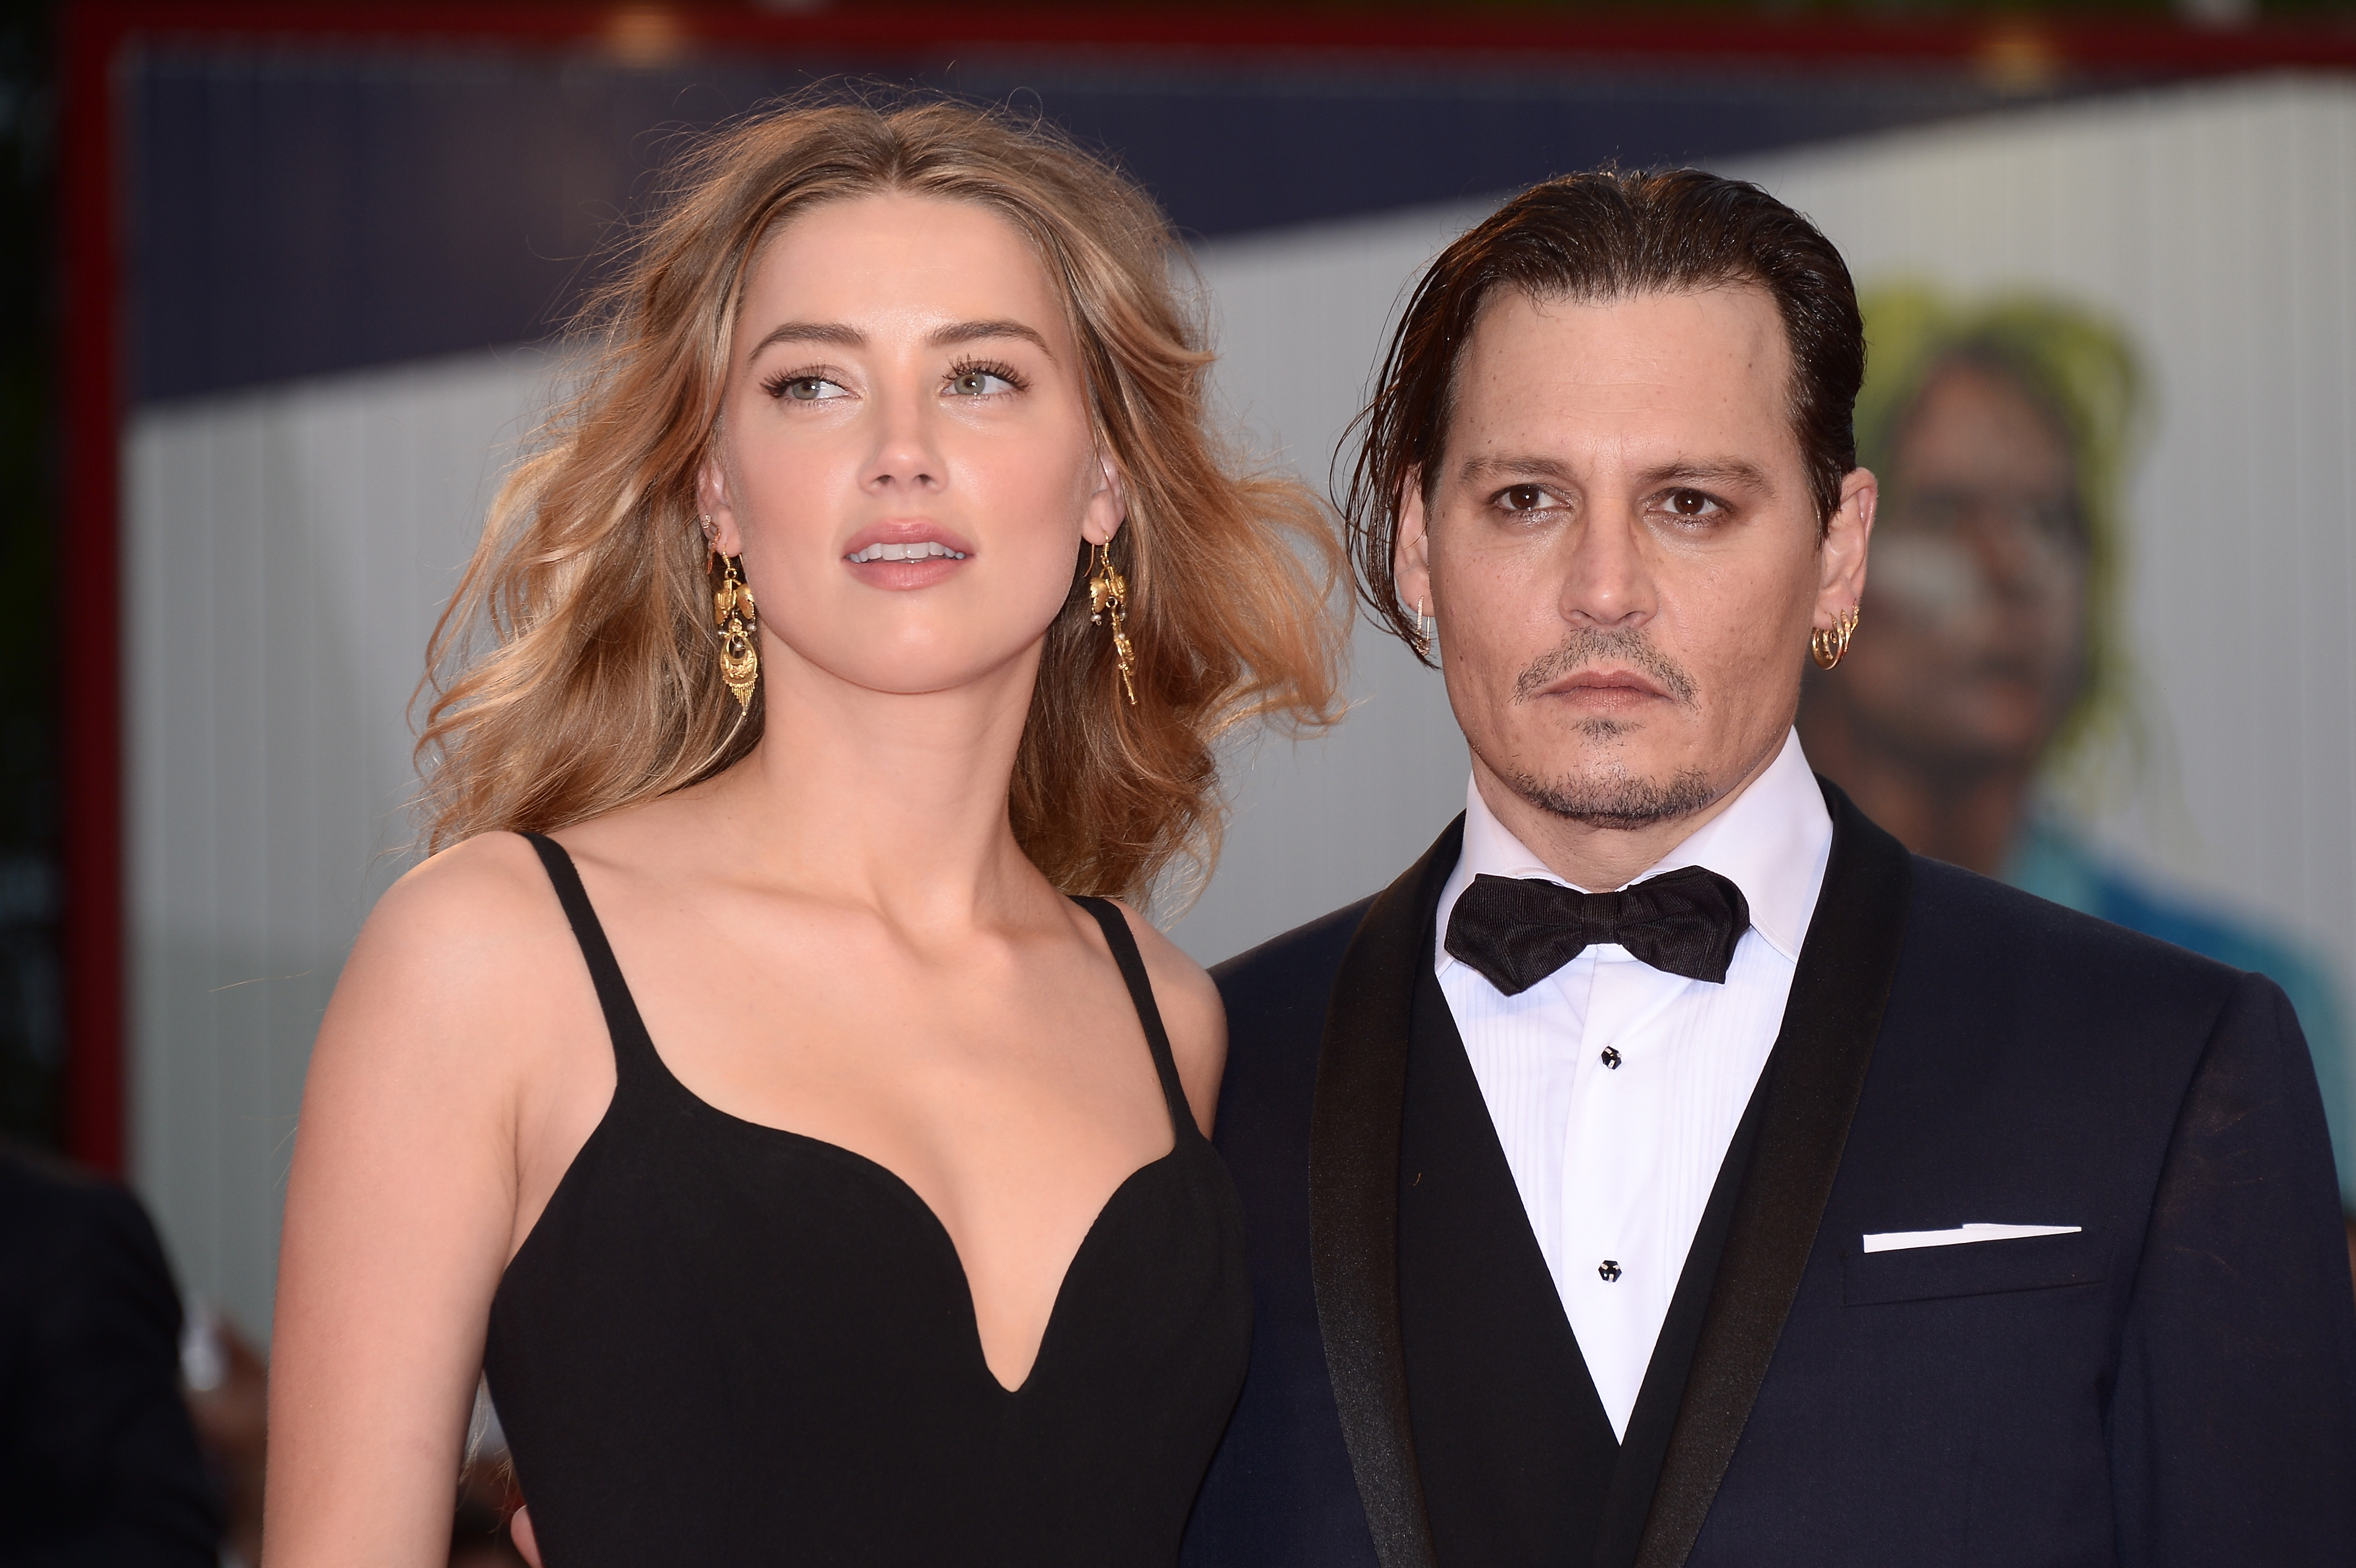 Johnny Depp, who once owned a yacht named after his ex-girlfriend, and and Amber Heard arrive on the red carpet at the Venice Film Festival in 2015